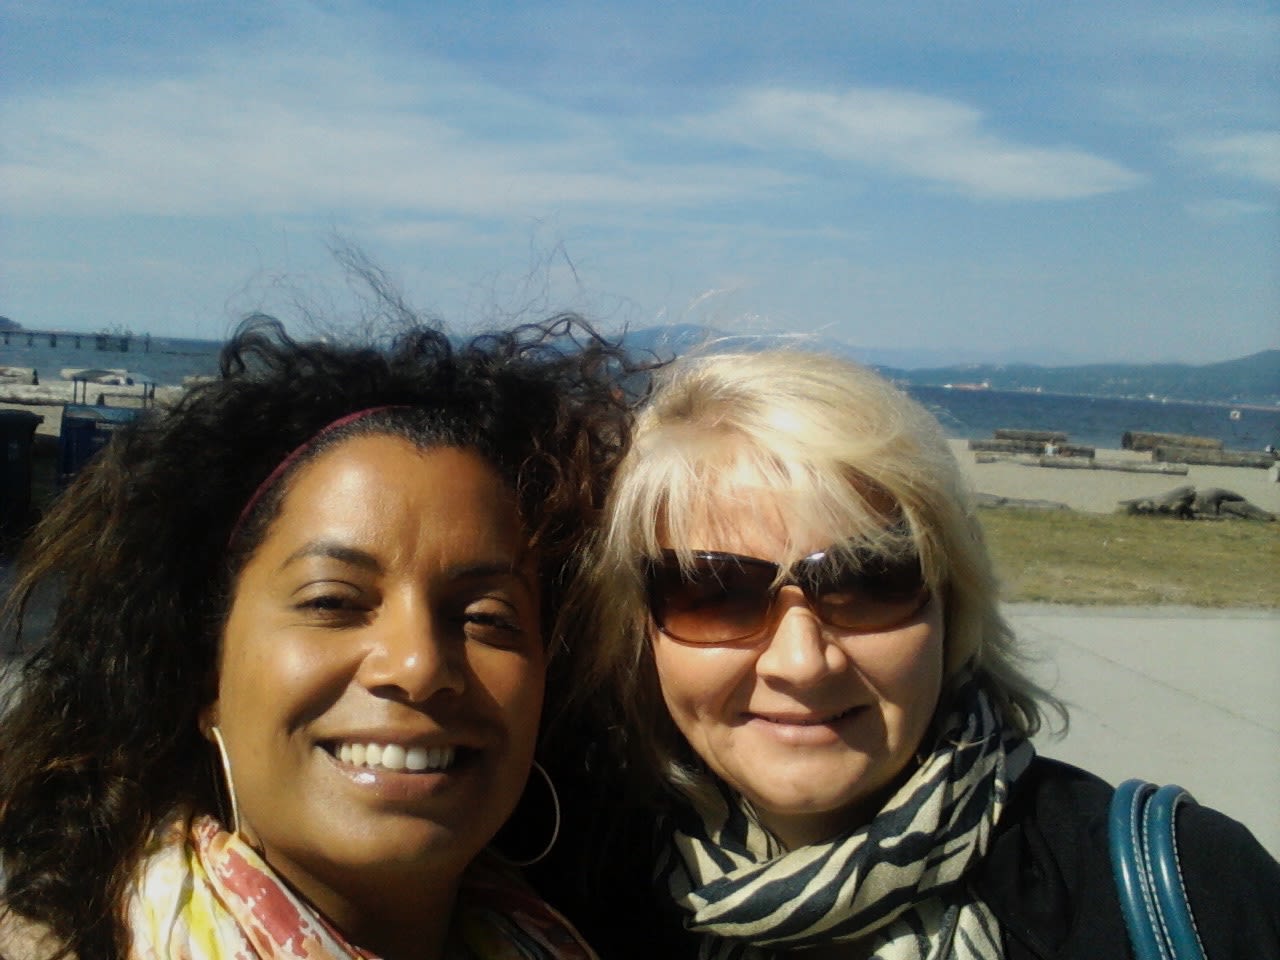 CNN's Michaela Pereira in Vancouver in 2012 with her person, Moyra Rodger, "who has affected not just my career but my life."<br />"What I found most fascinating in the telling of our story is that putting so much attention on Moyra made her incredibly uncomfortable! I suppose I shouldn't be surprised. In my many years of journalism and community service, rare is the hero or mentor who volunteers to stand in the spotlight. Moyra was no different; she almost squirmed any time a complimentary word of thanks was leveled her way."